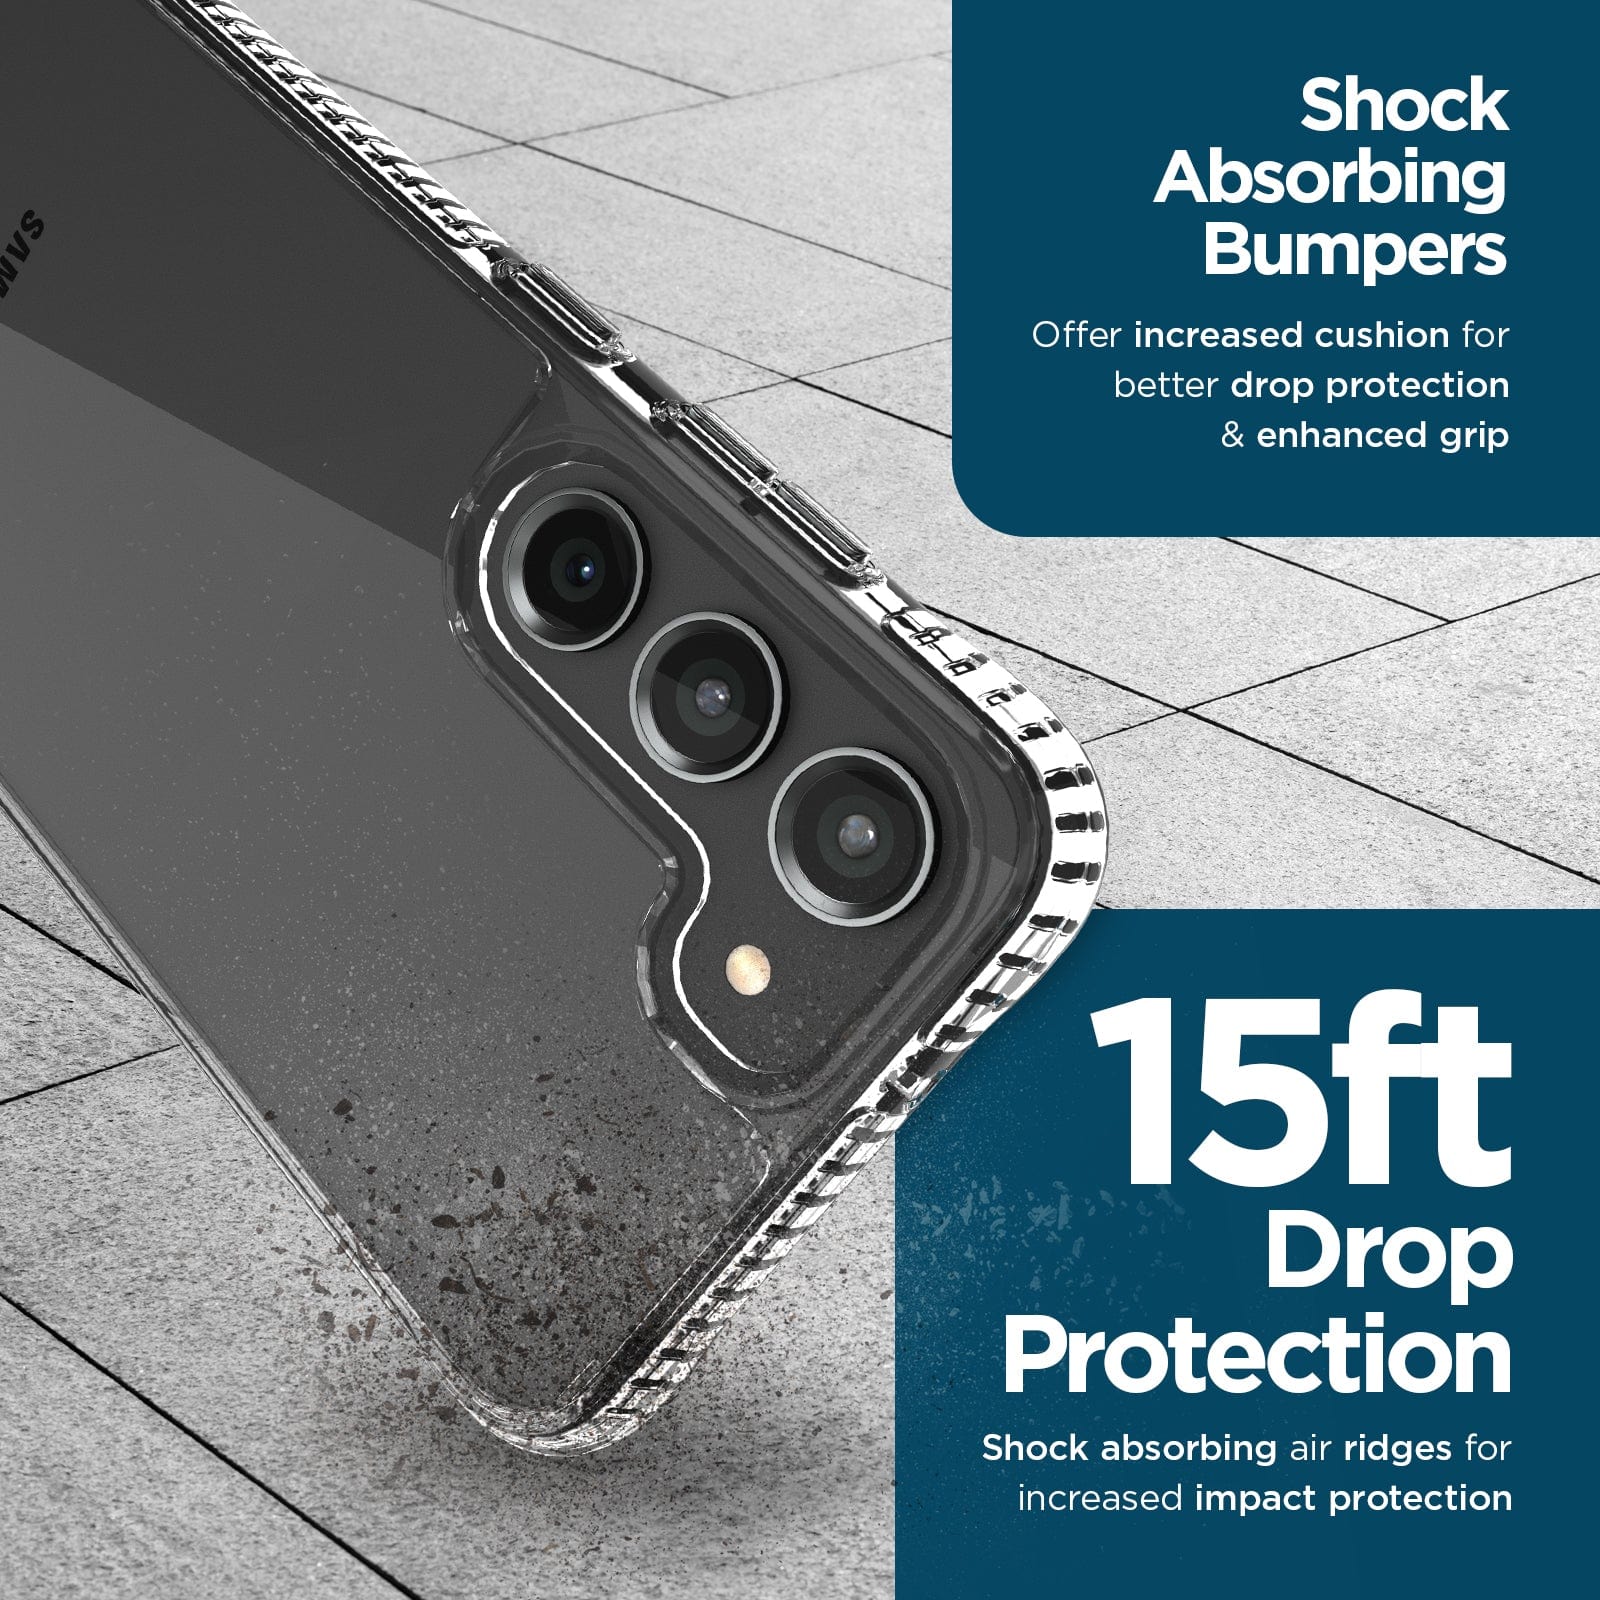 SHOCK ABSORBING BUMPERS. OFFER INCREASED CUSHION FOR BETTER DROP PROTECTION & ENHANCED GRIP. 15FT DROP PROTECTION. SHOCK ABSORBING AIR RIDGES FOR INCREASED IMPACT PROTECTION.